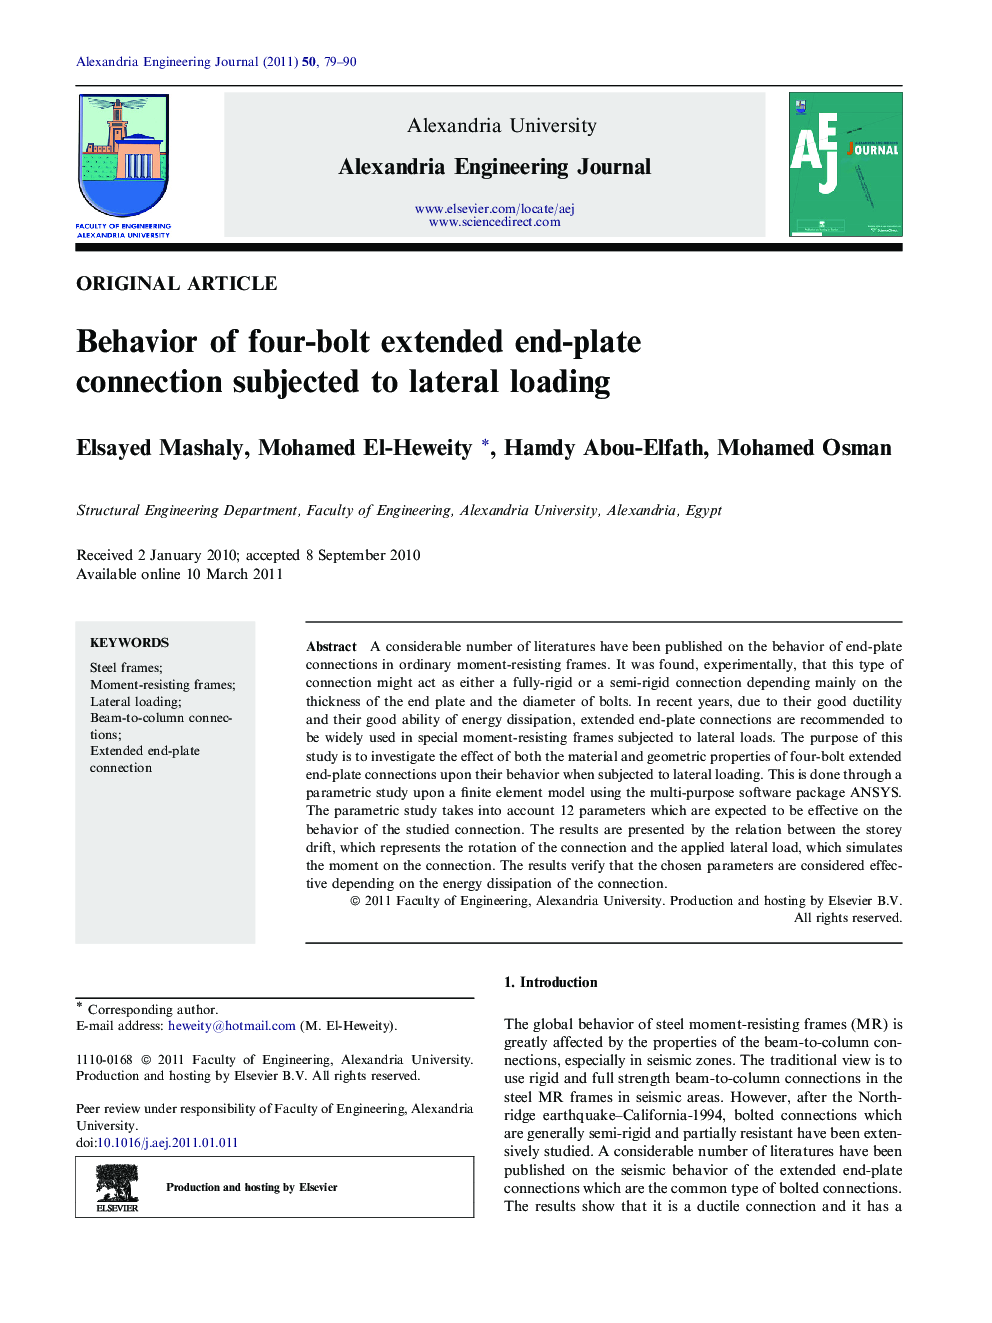 Behavior of four-bolt extended end-plate connection subjected to lateral loading